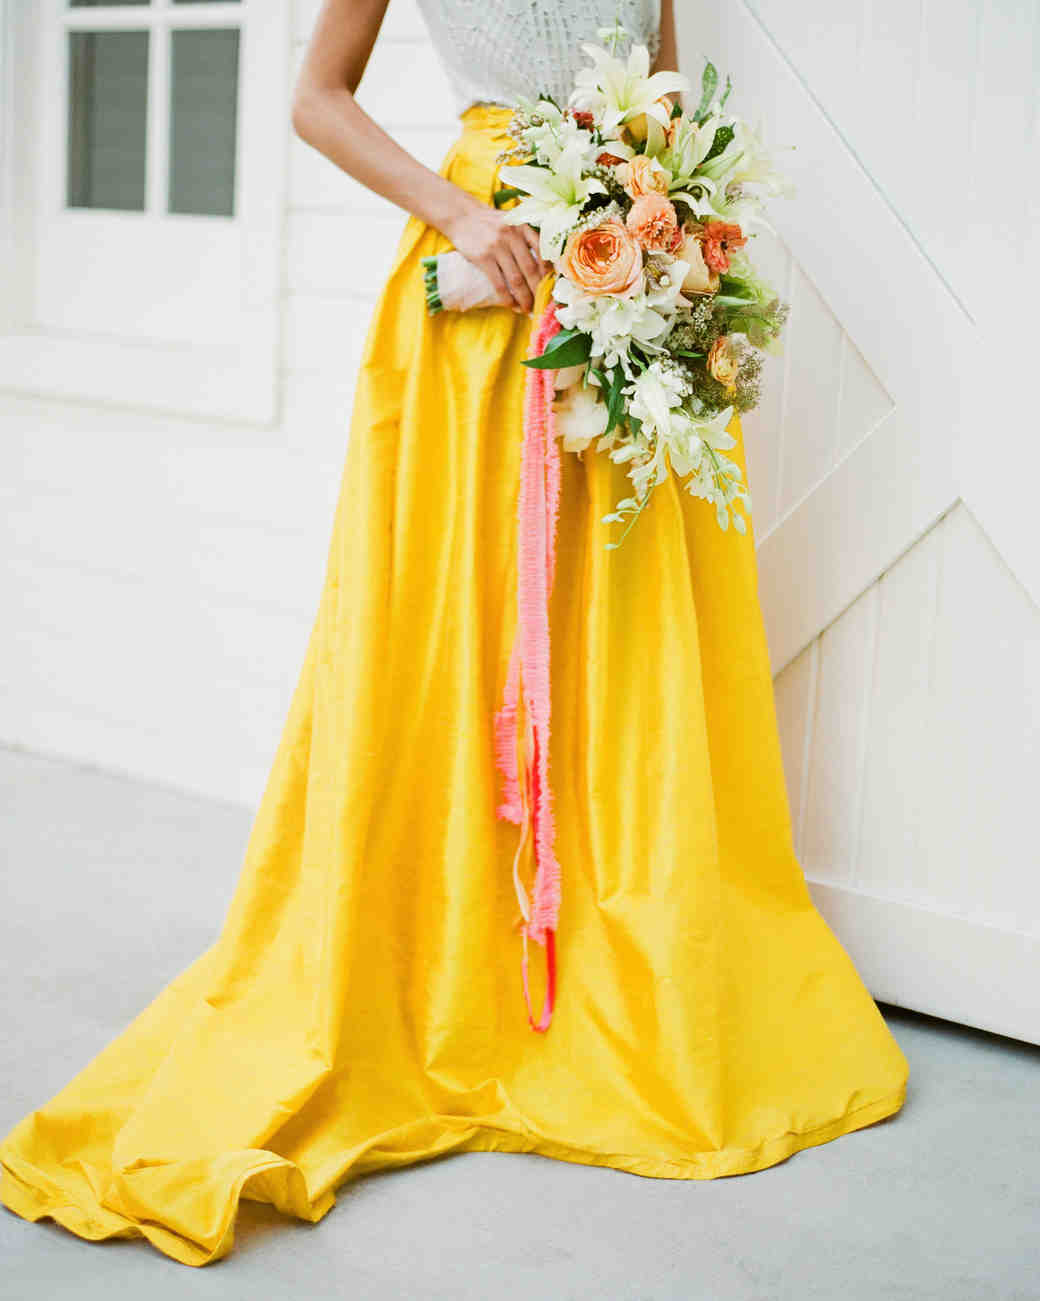 24 Yellow Wedding Ideas That Will Make Your Day Bright and